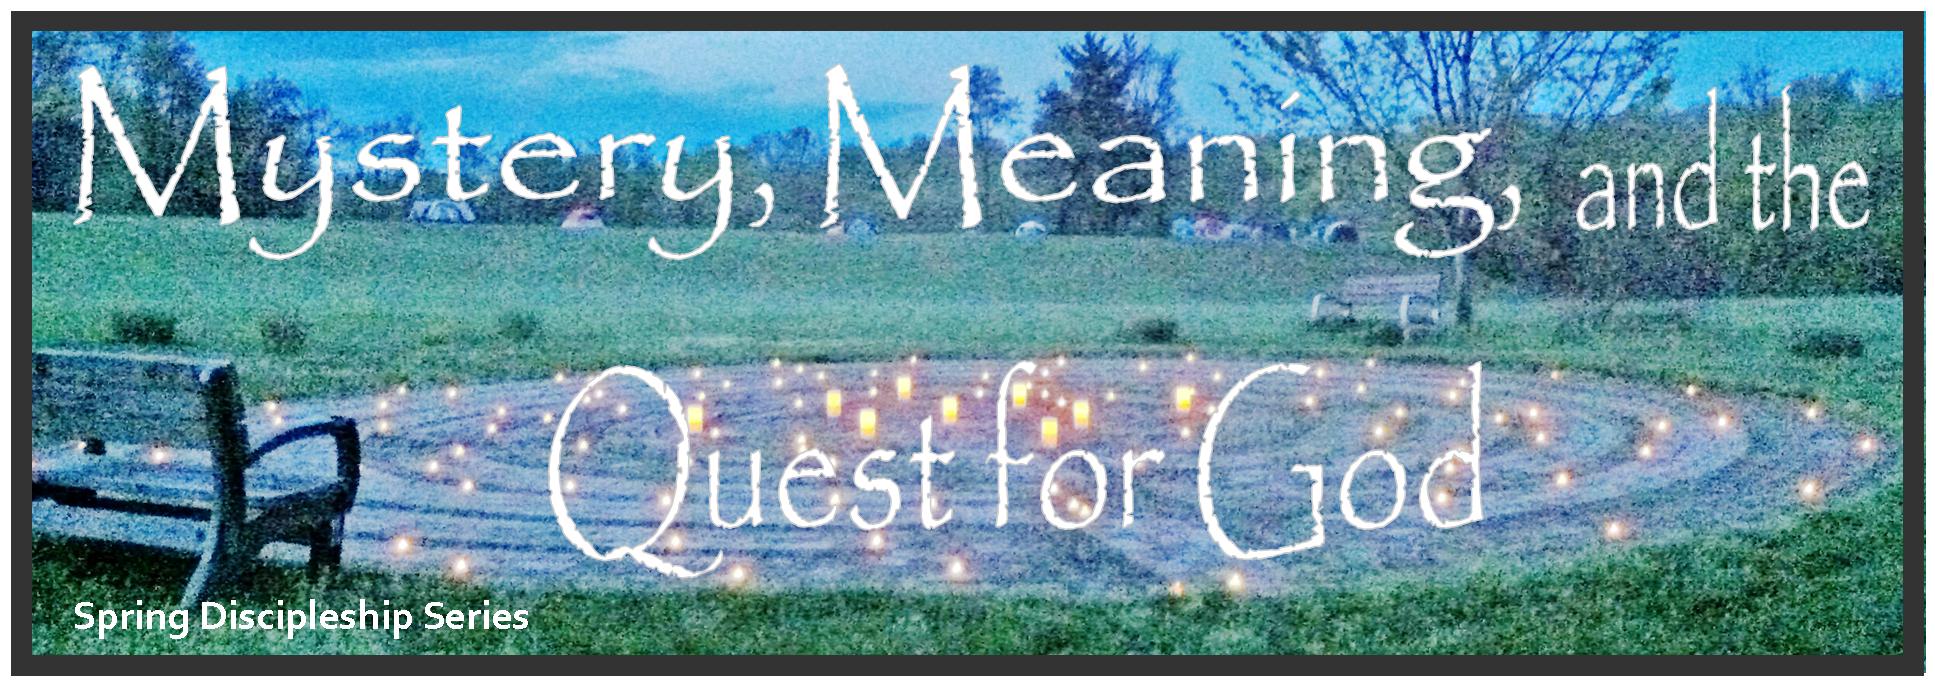 Mystery Meaning and the Quest for God